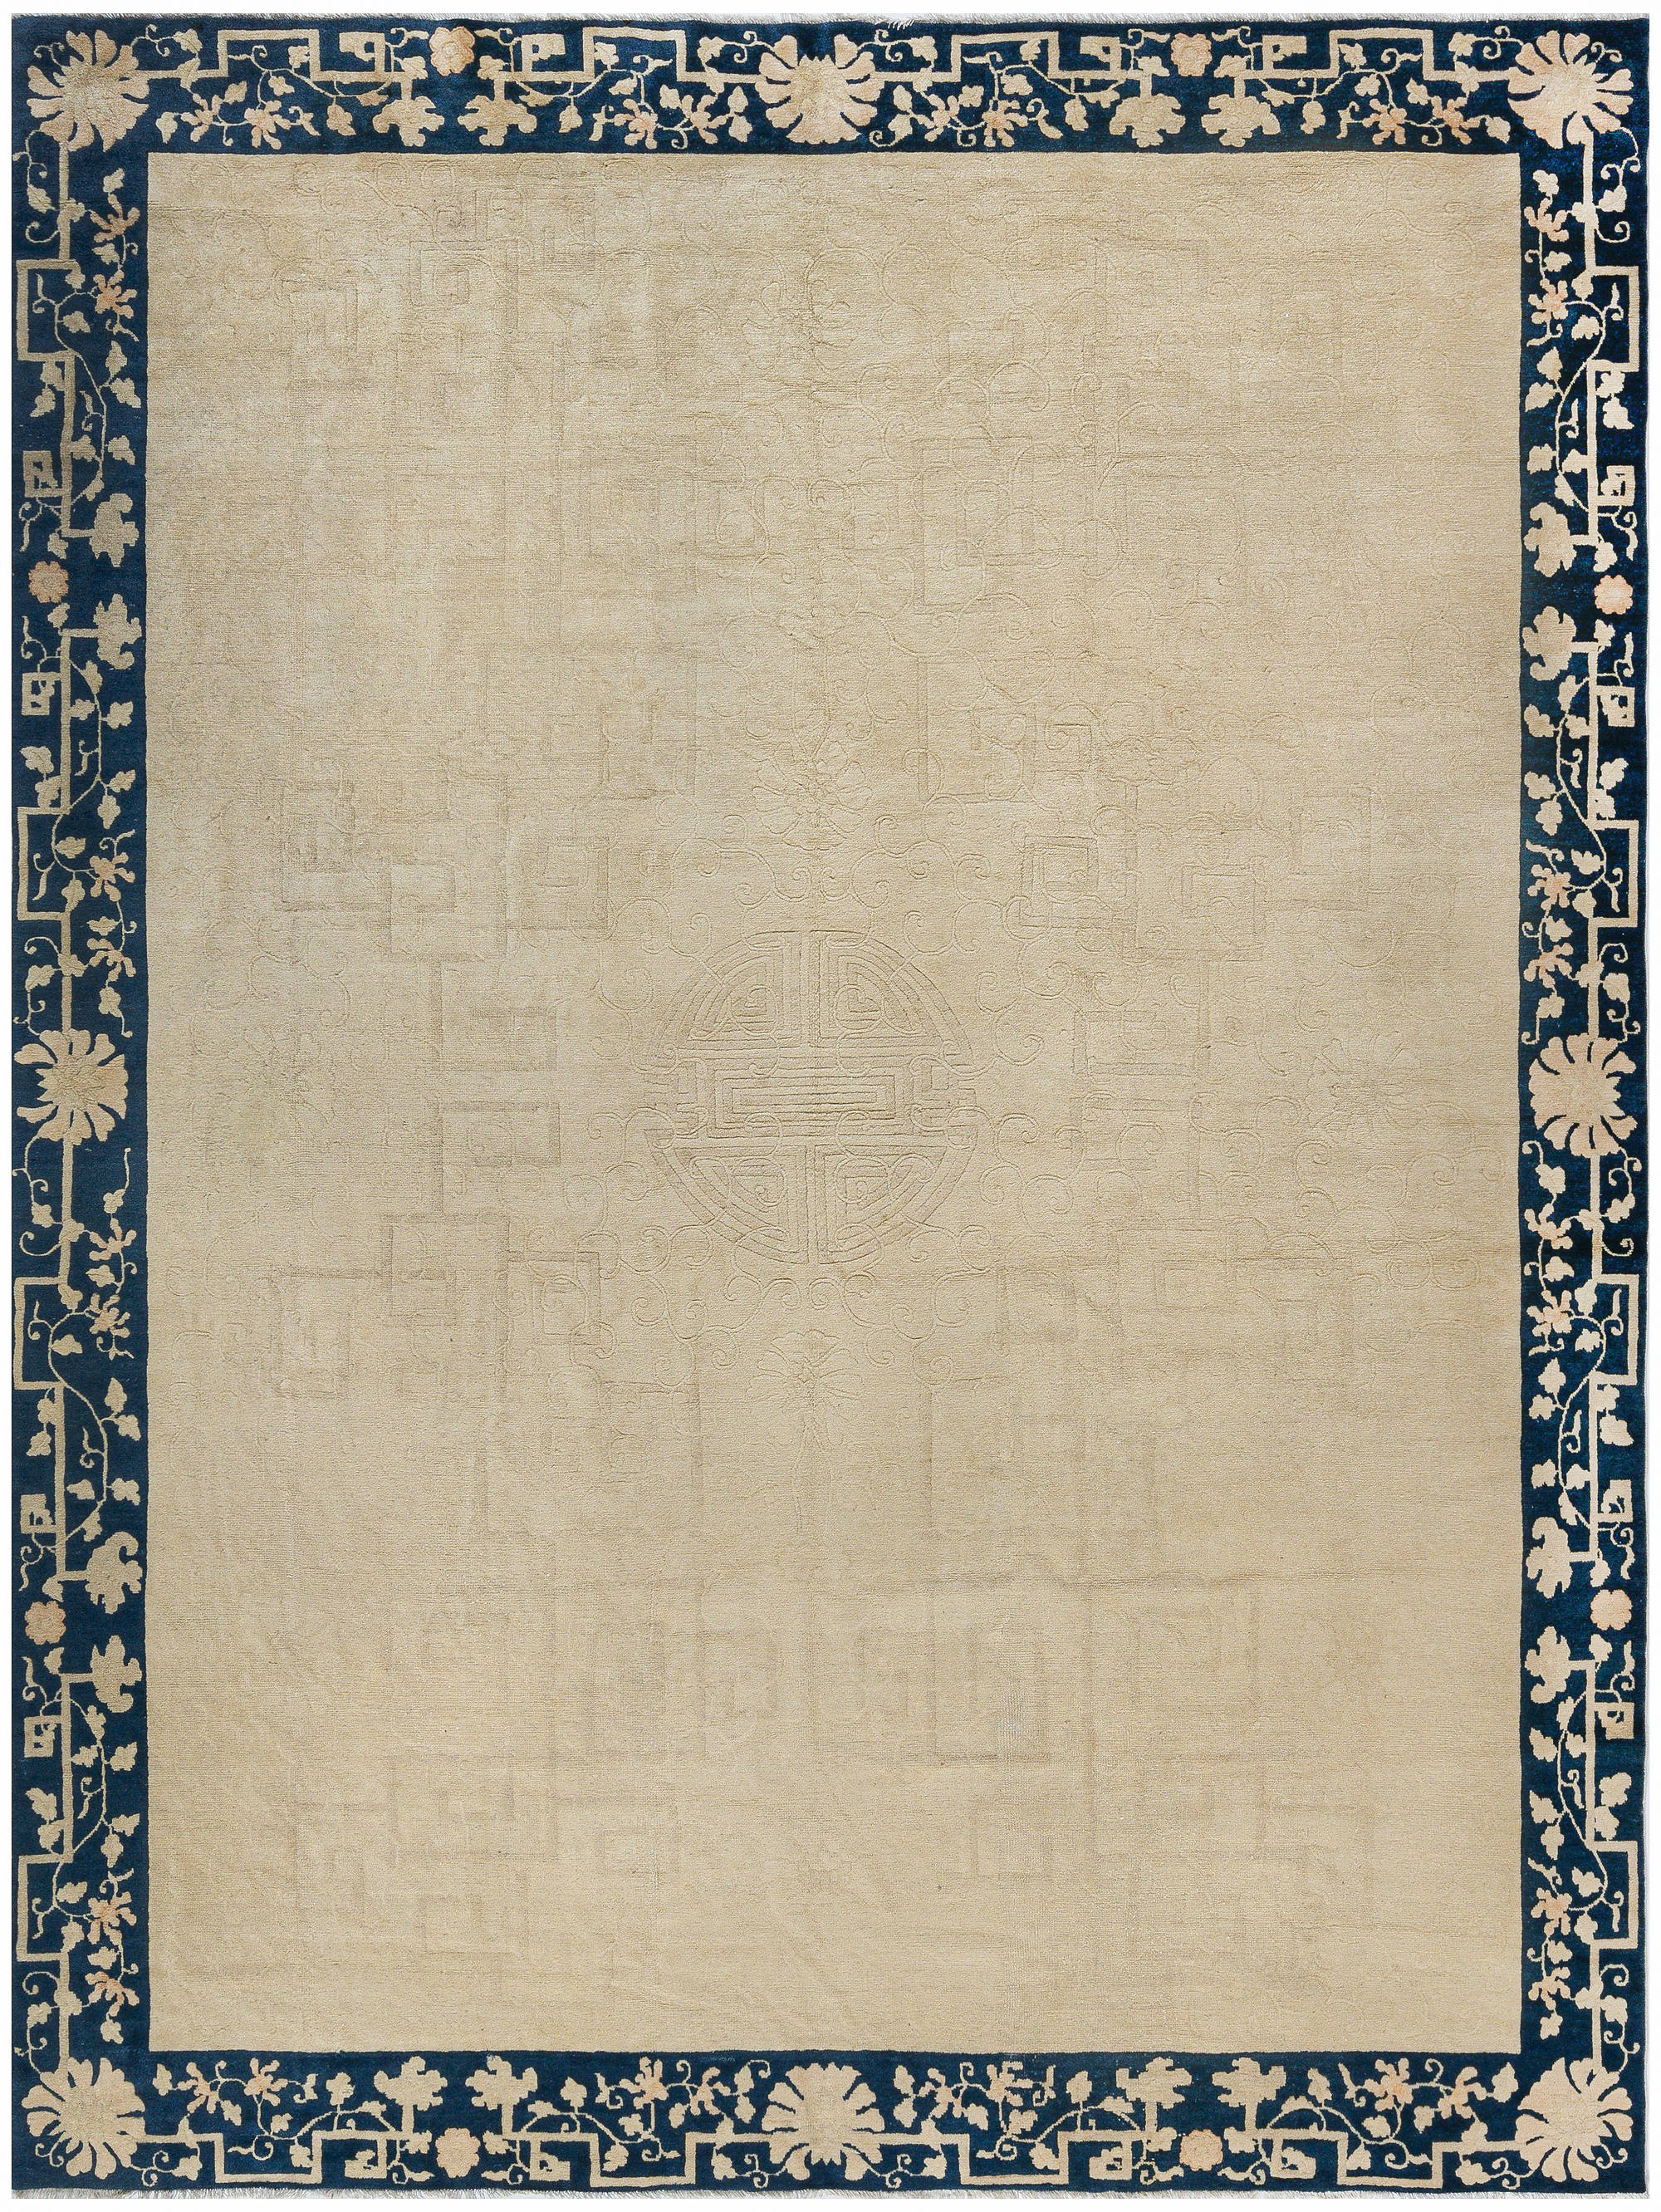 Early 20th Century <mark class='searchwp-highlight'>Chinese</mark> Beige and Blue Handmade Wool Rug BB7347